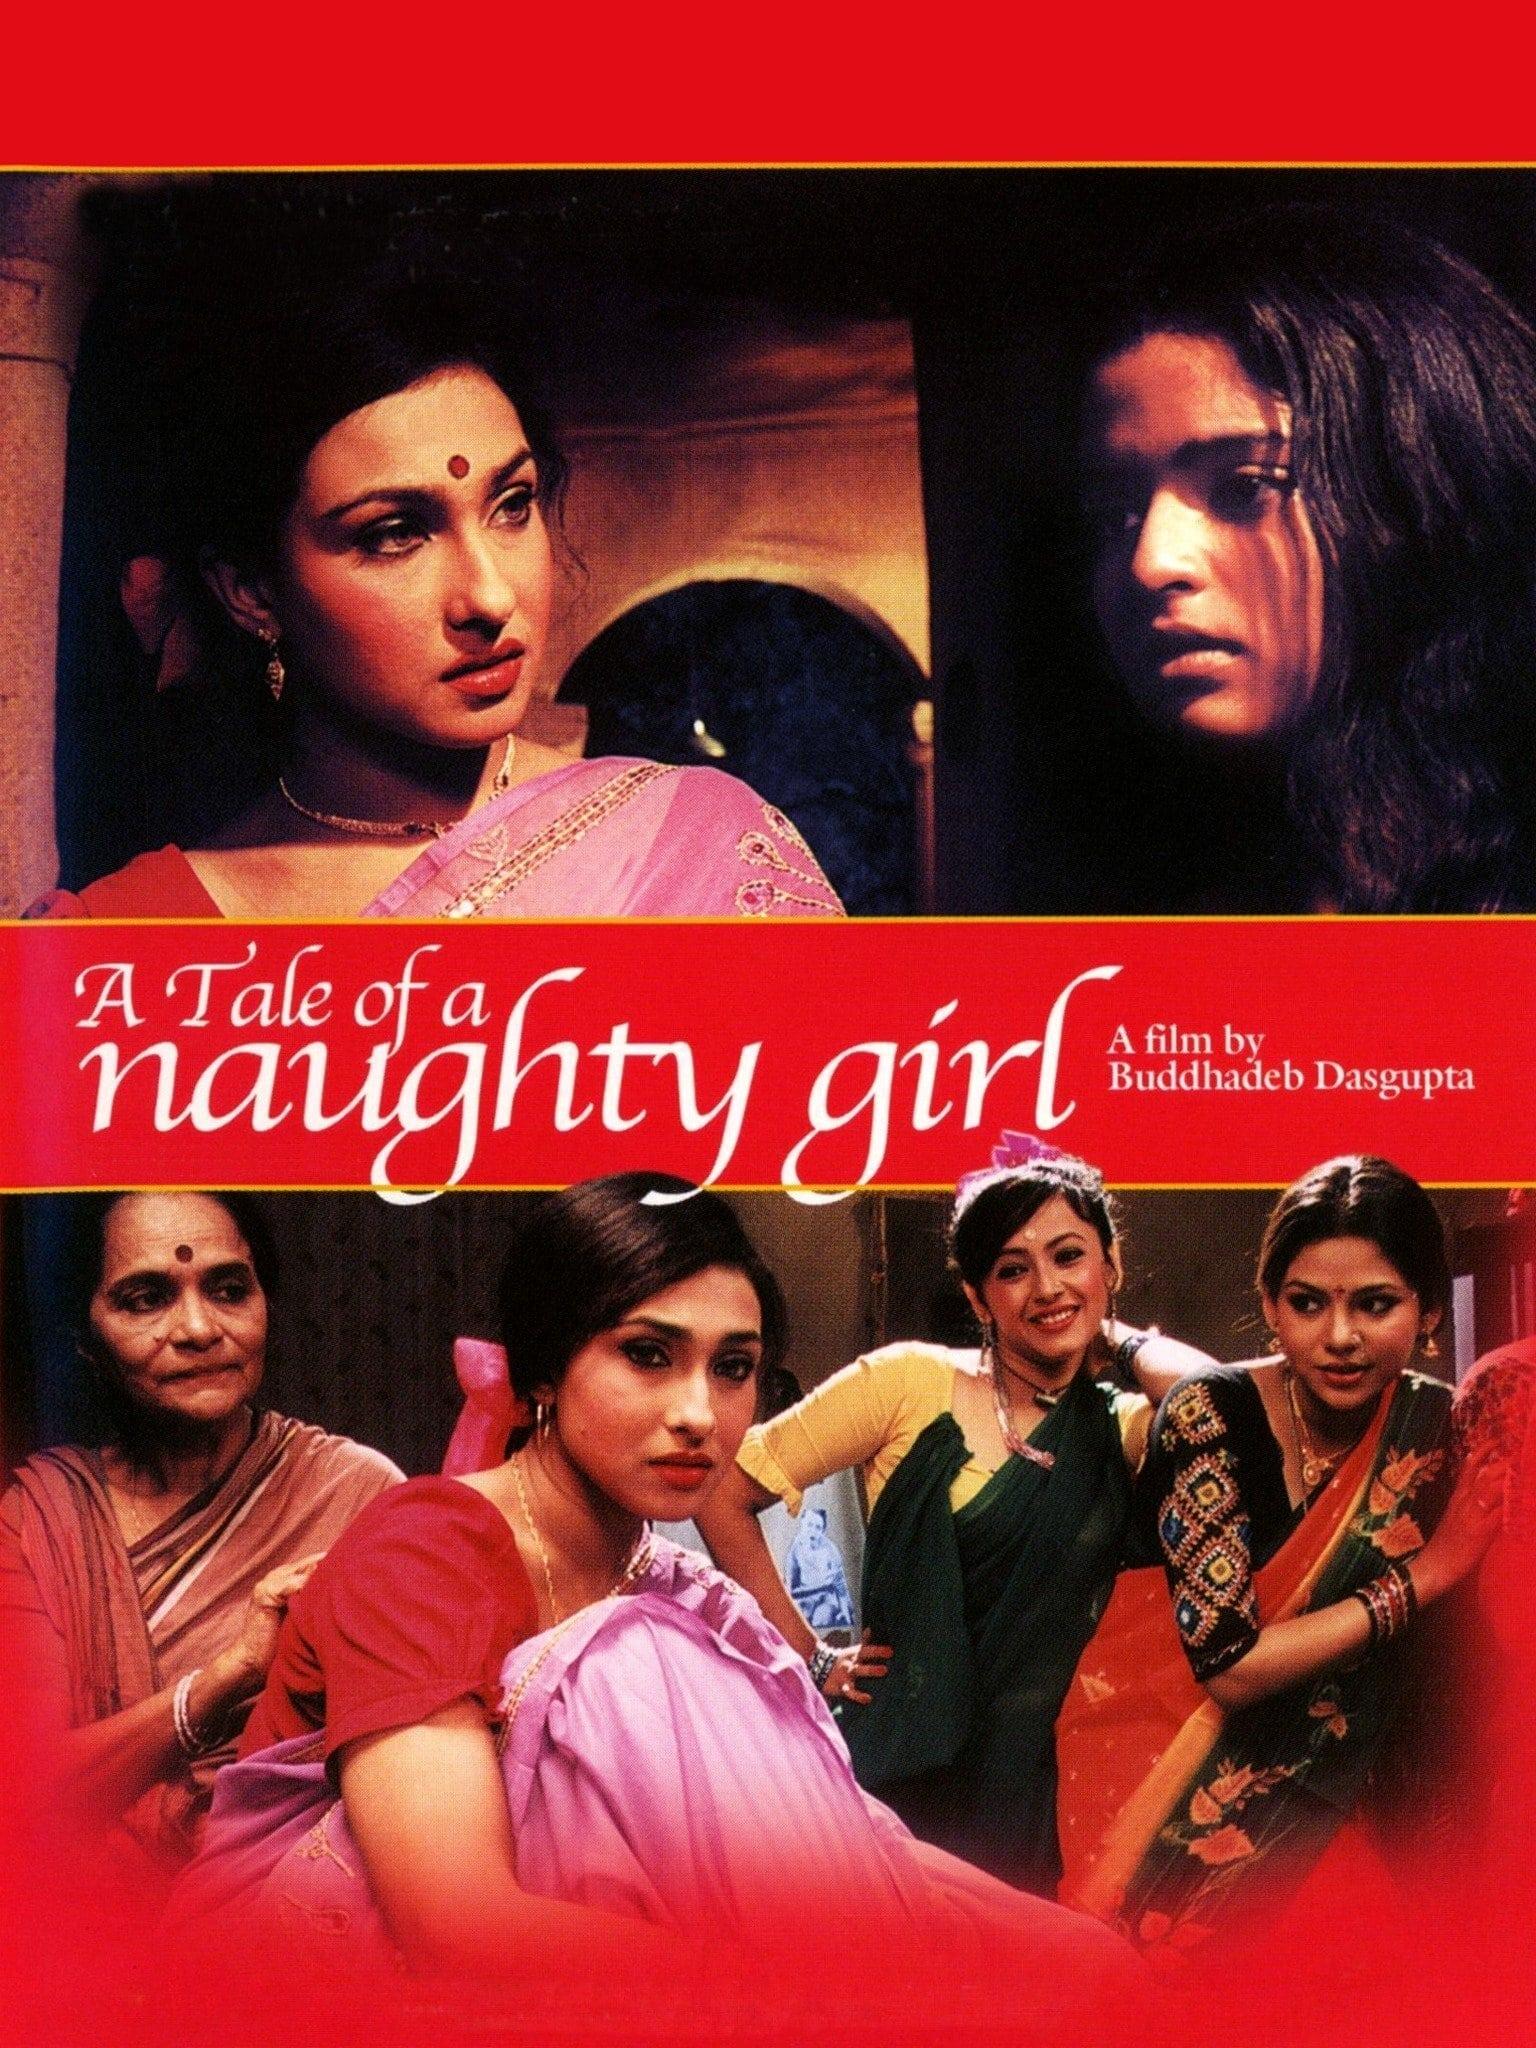 A Tale of a Naughty Girl poster